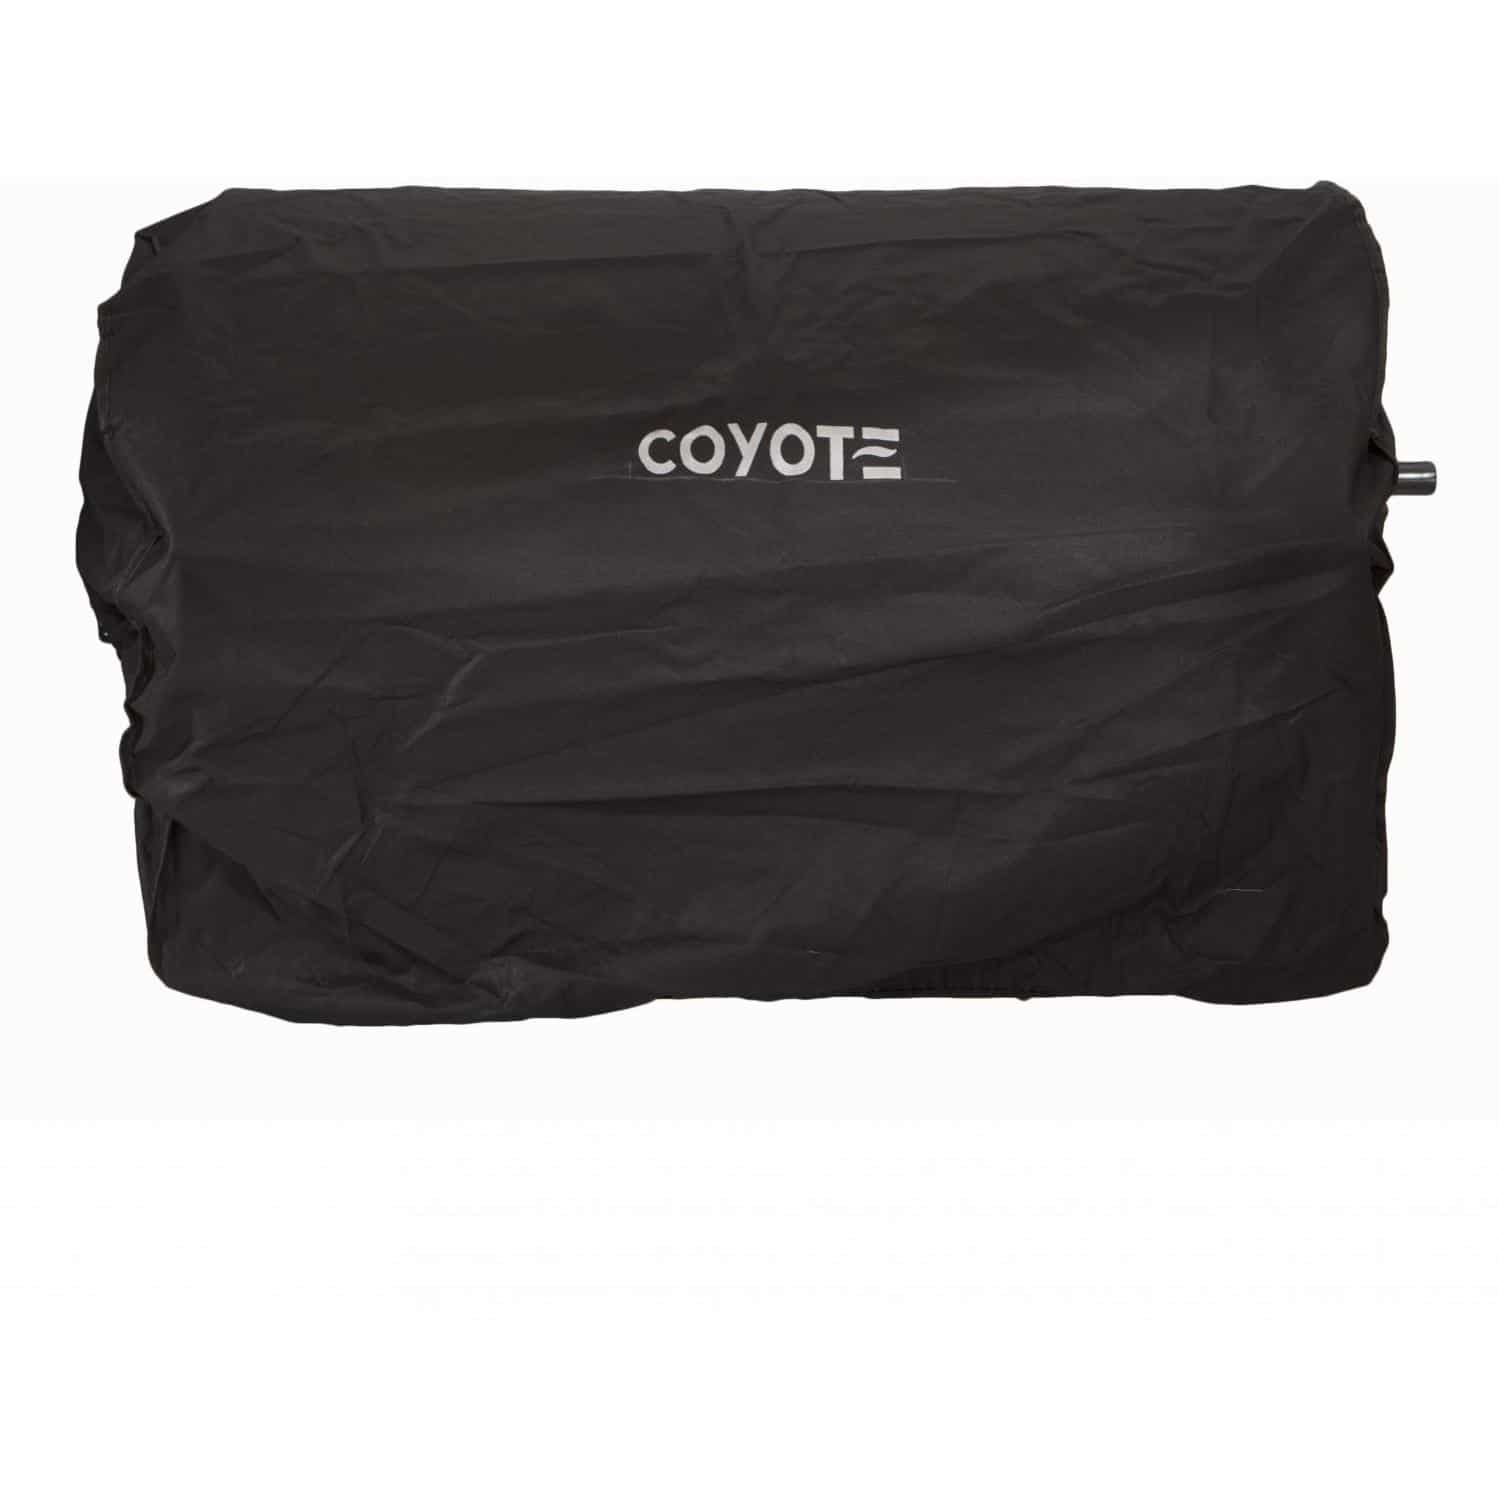 Coyote Built-In Grill Covers